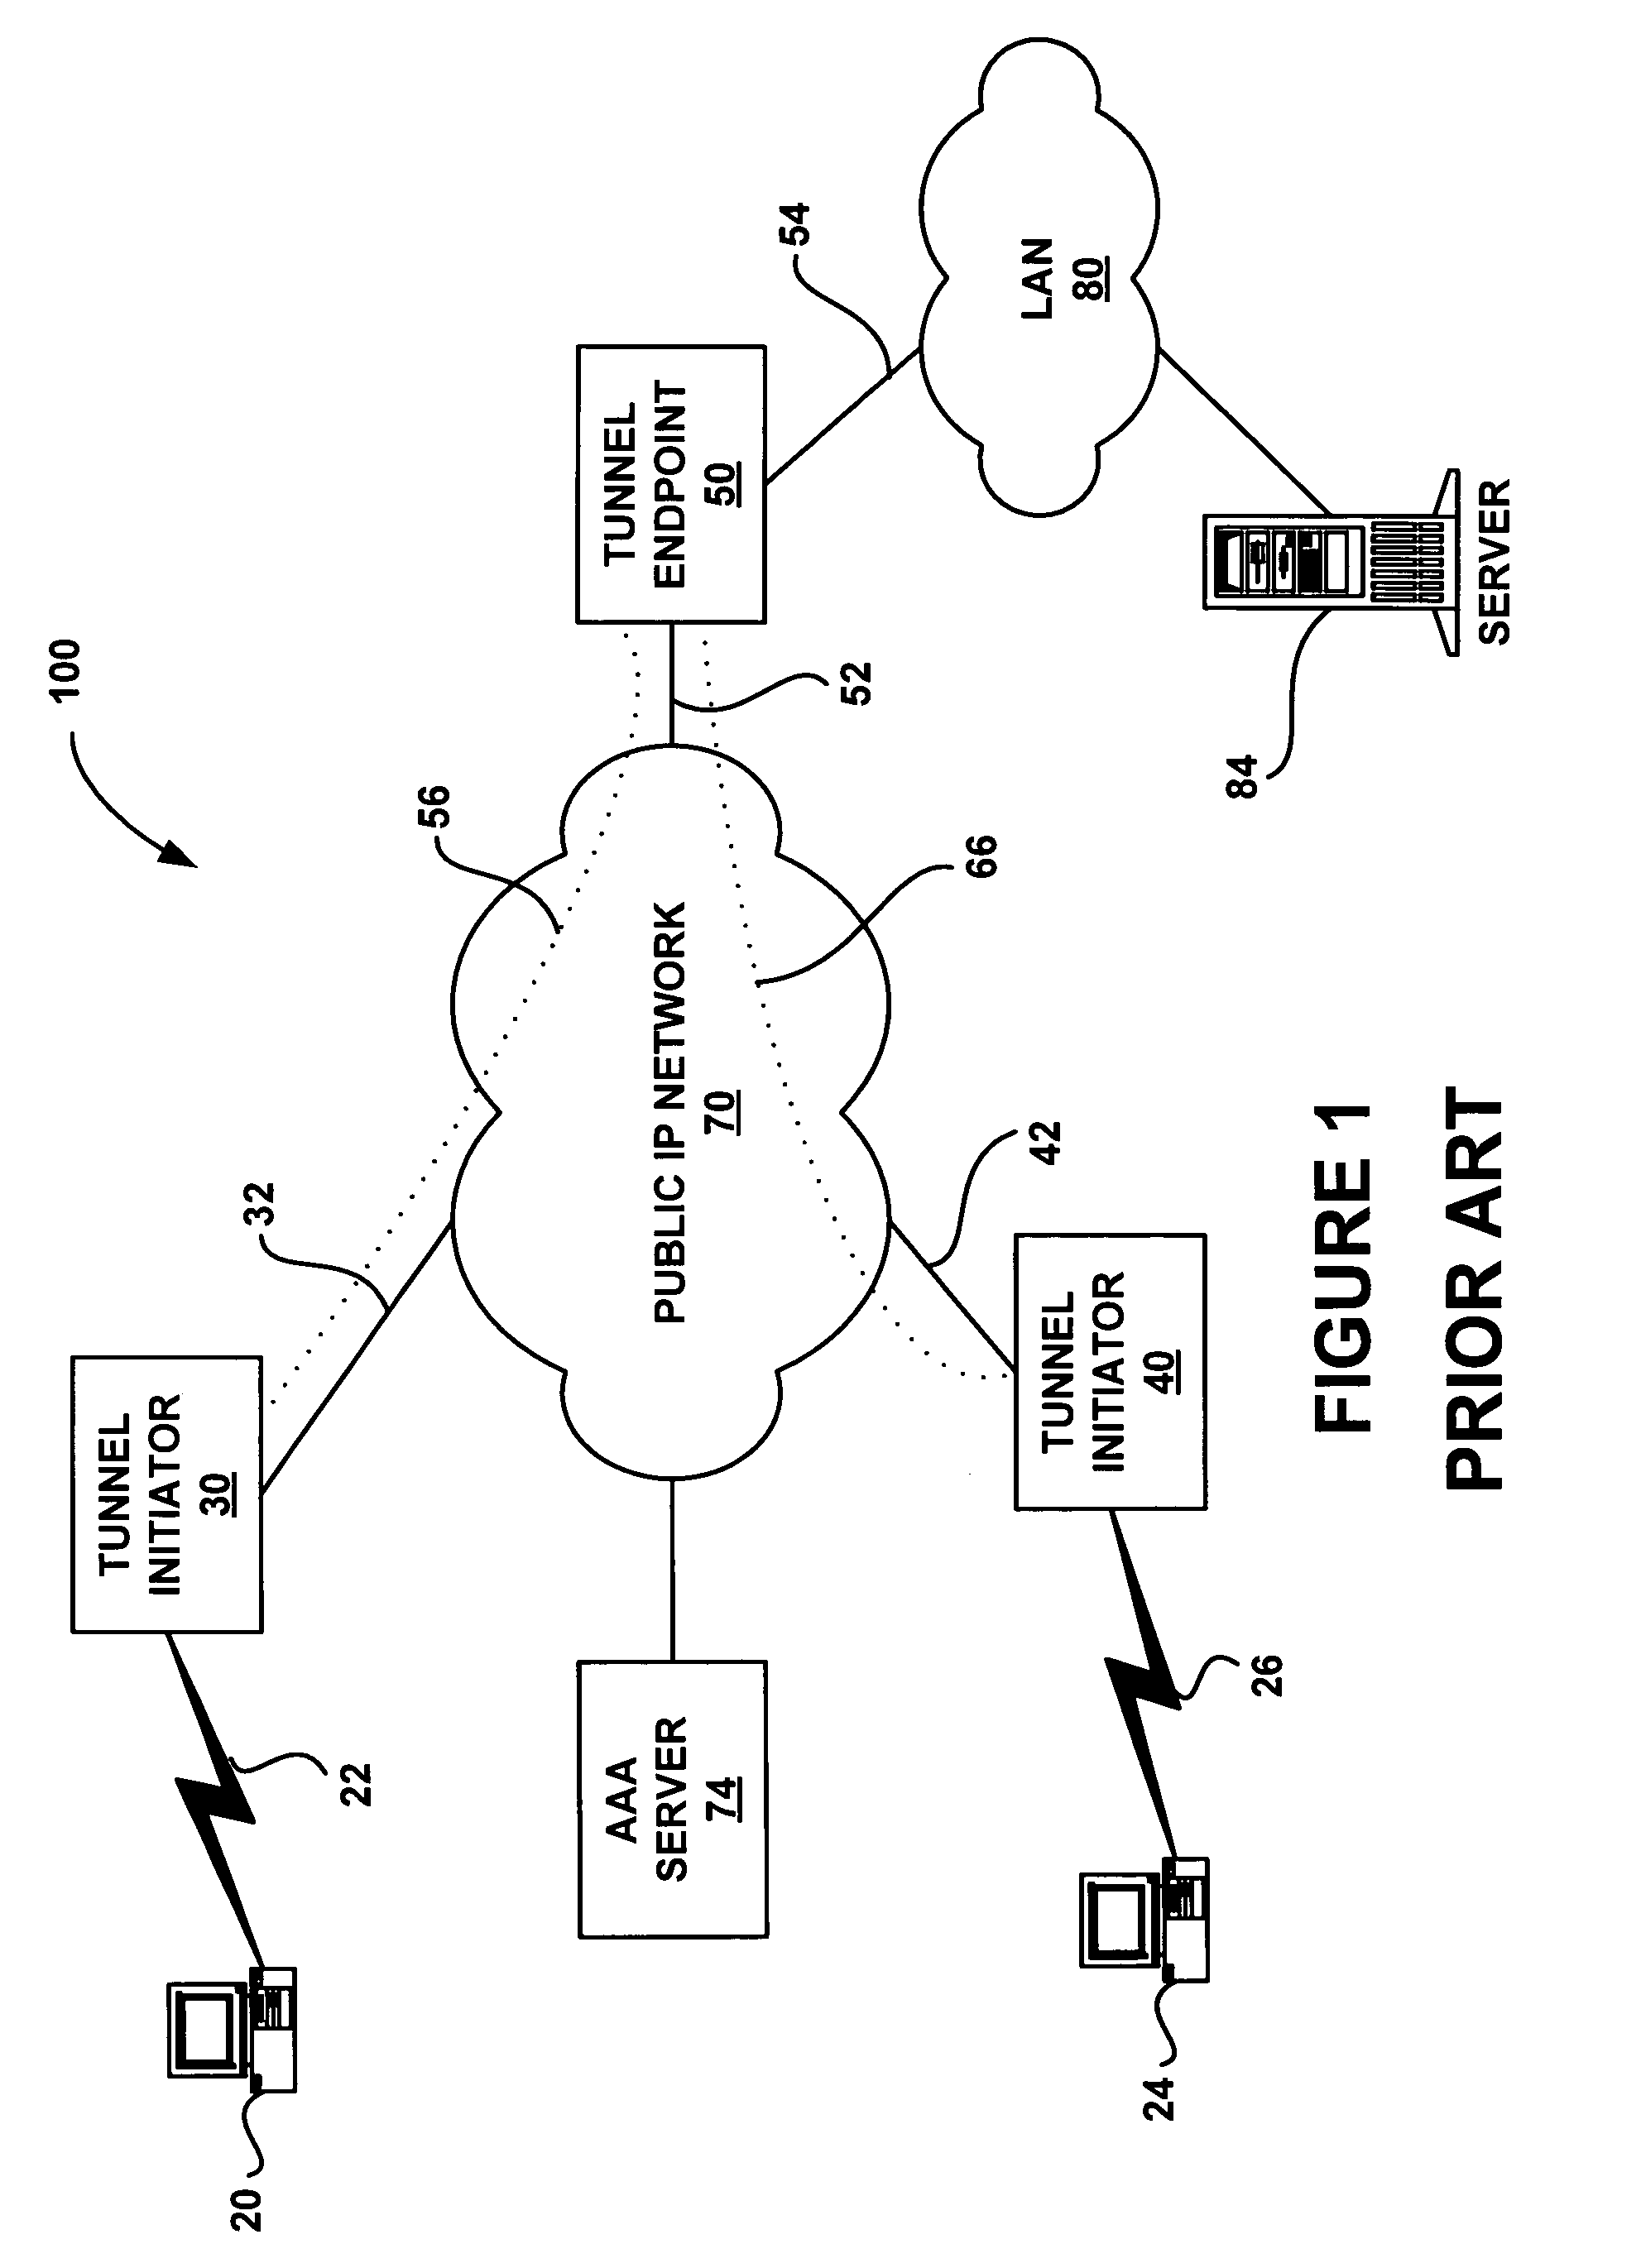 System and method for offloading a computational service on a point-to-point communication link